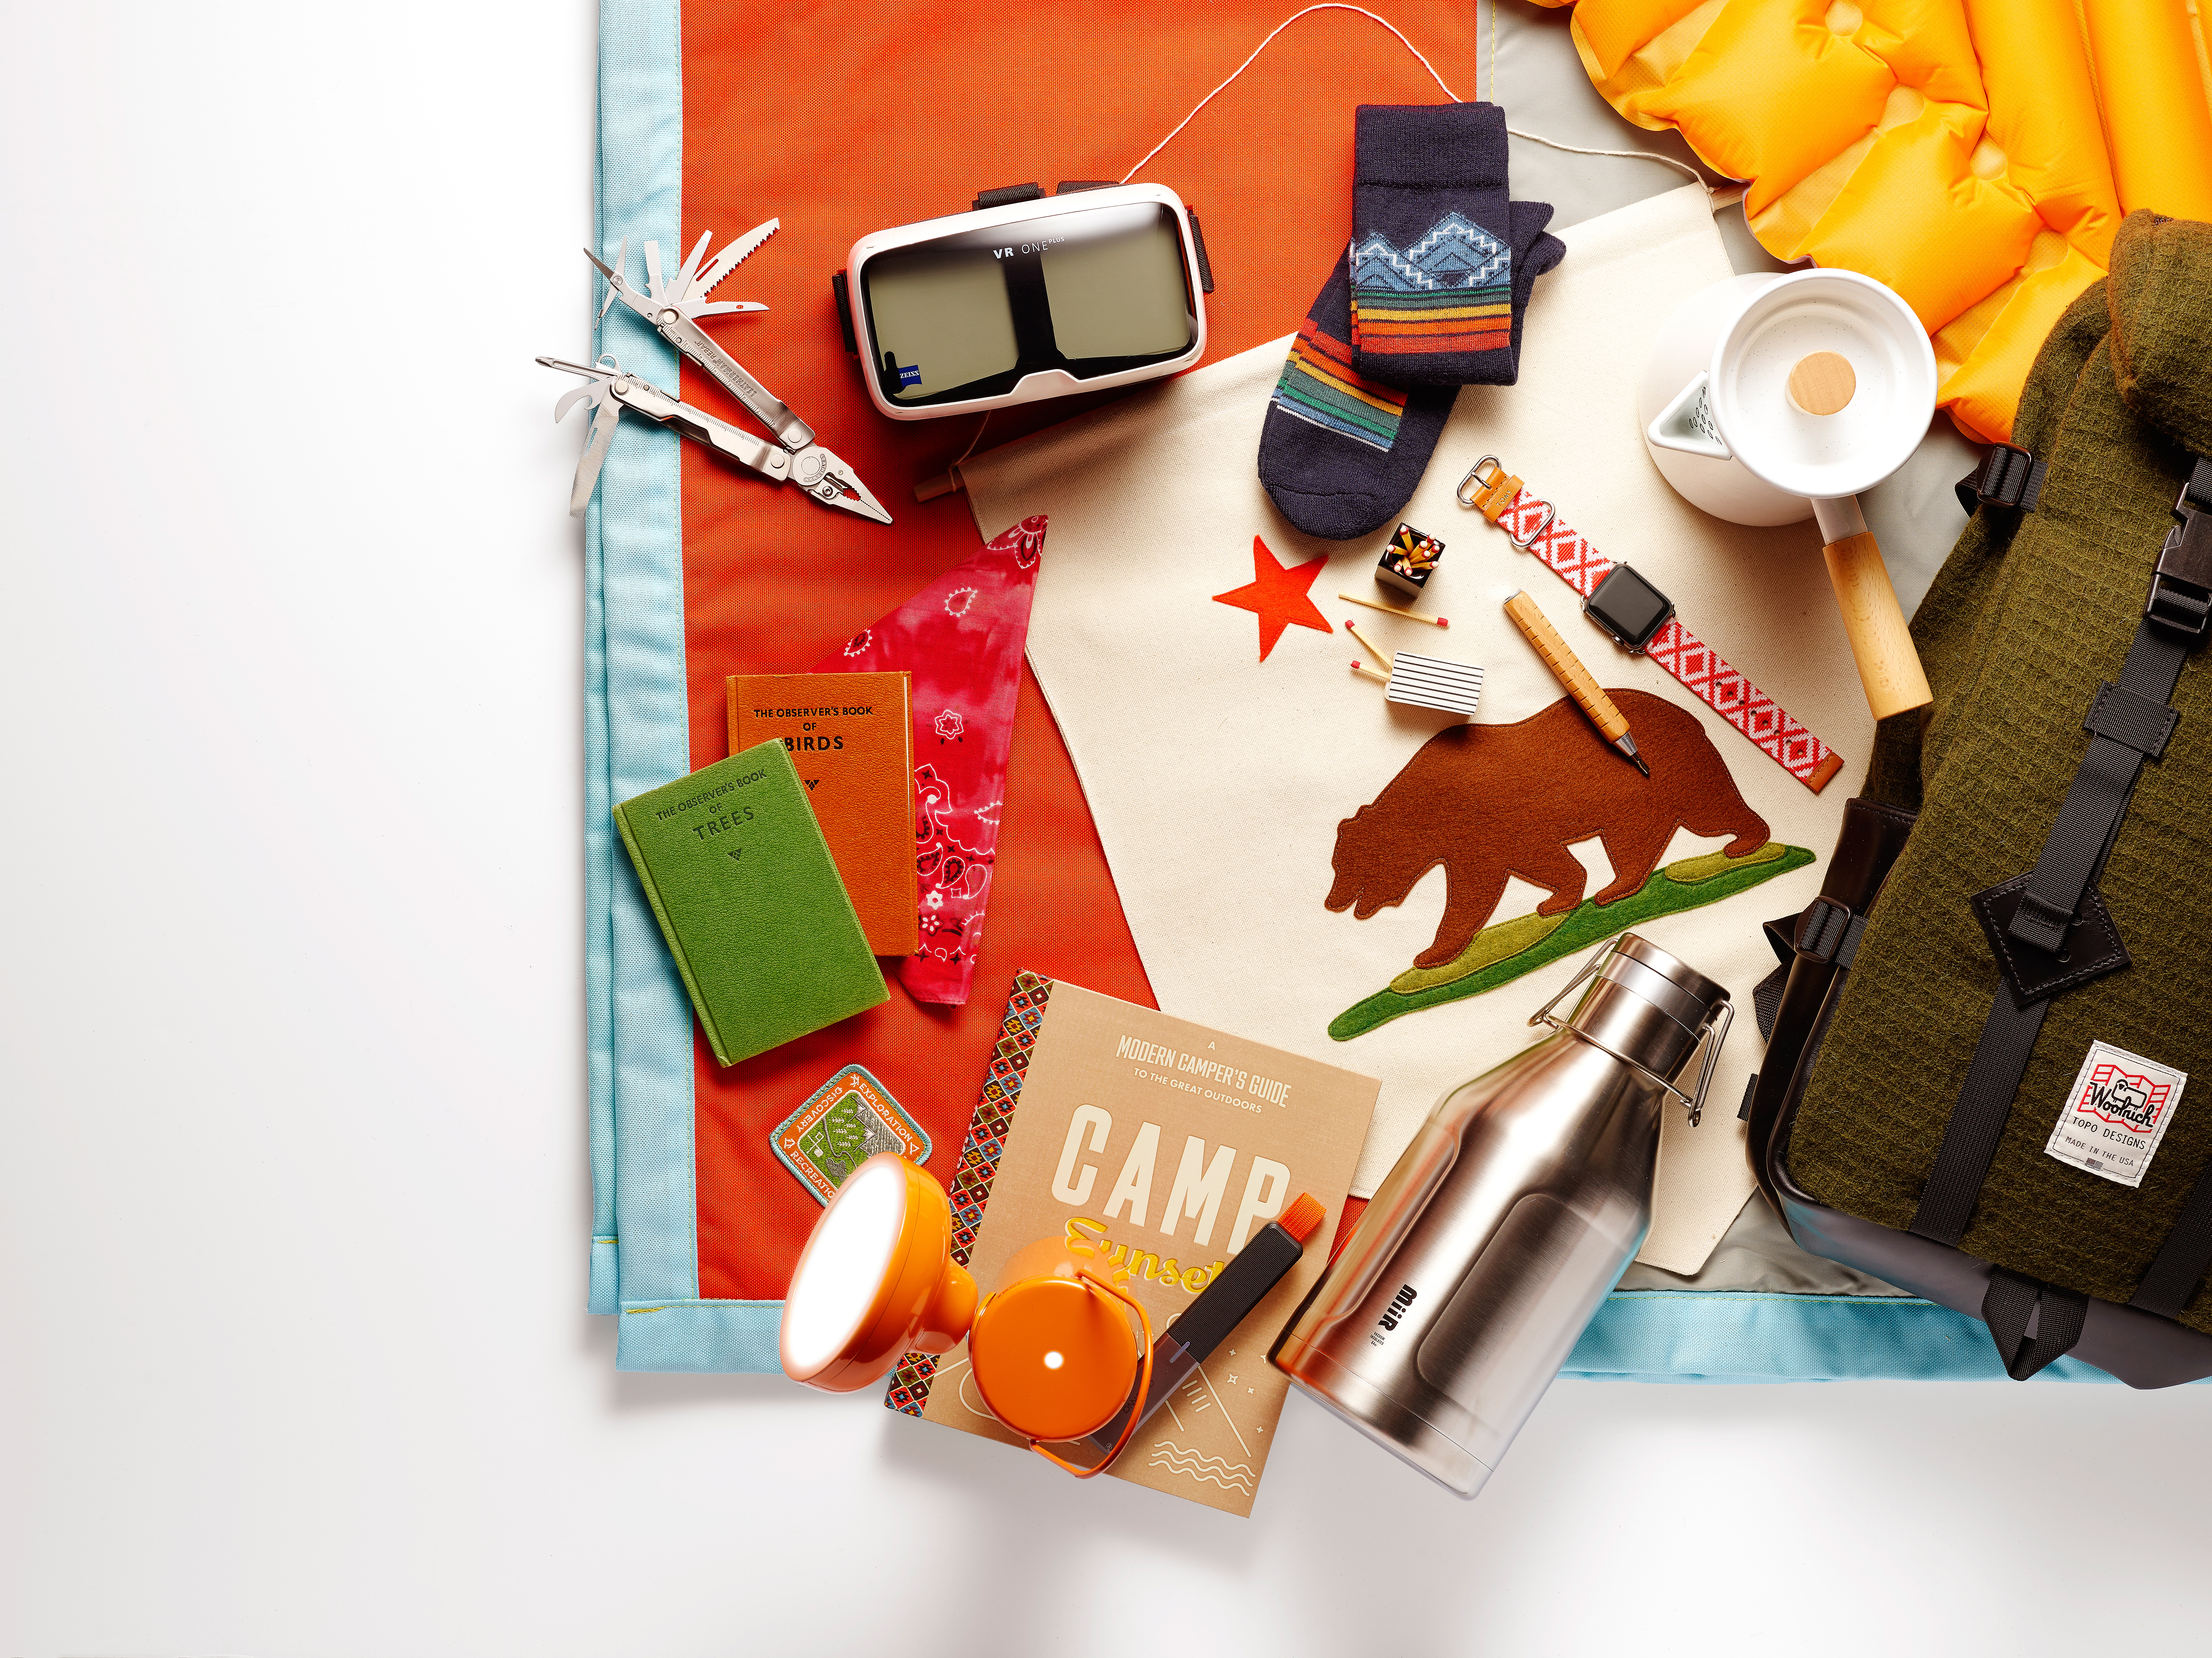 50 Great Gifts for Travelers